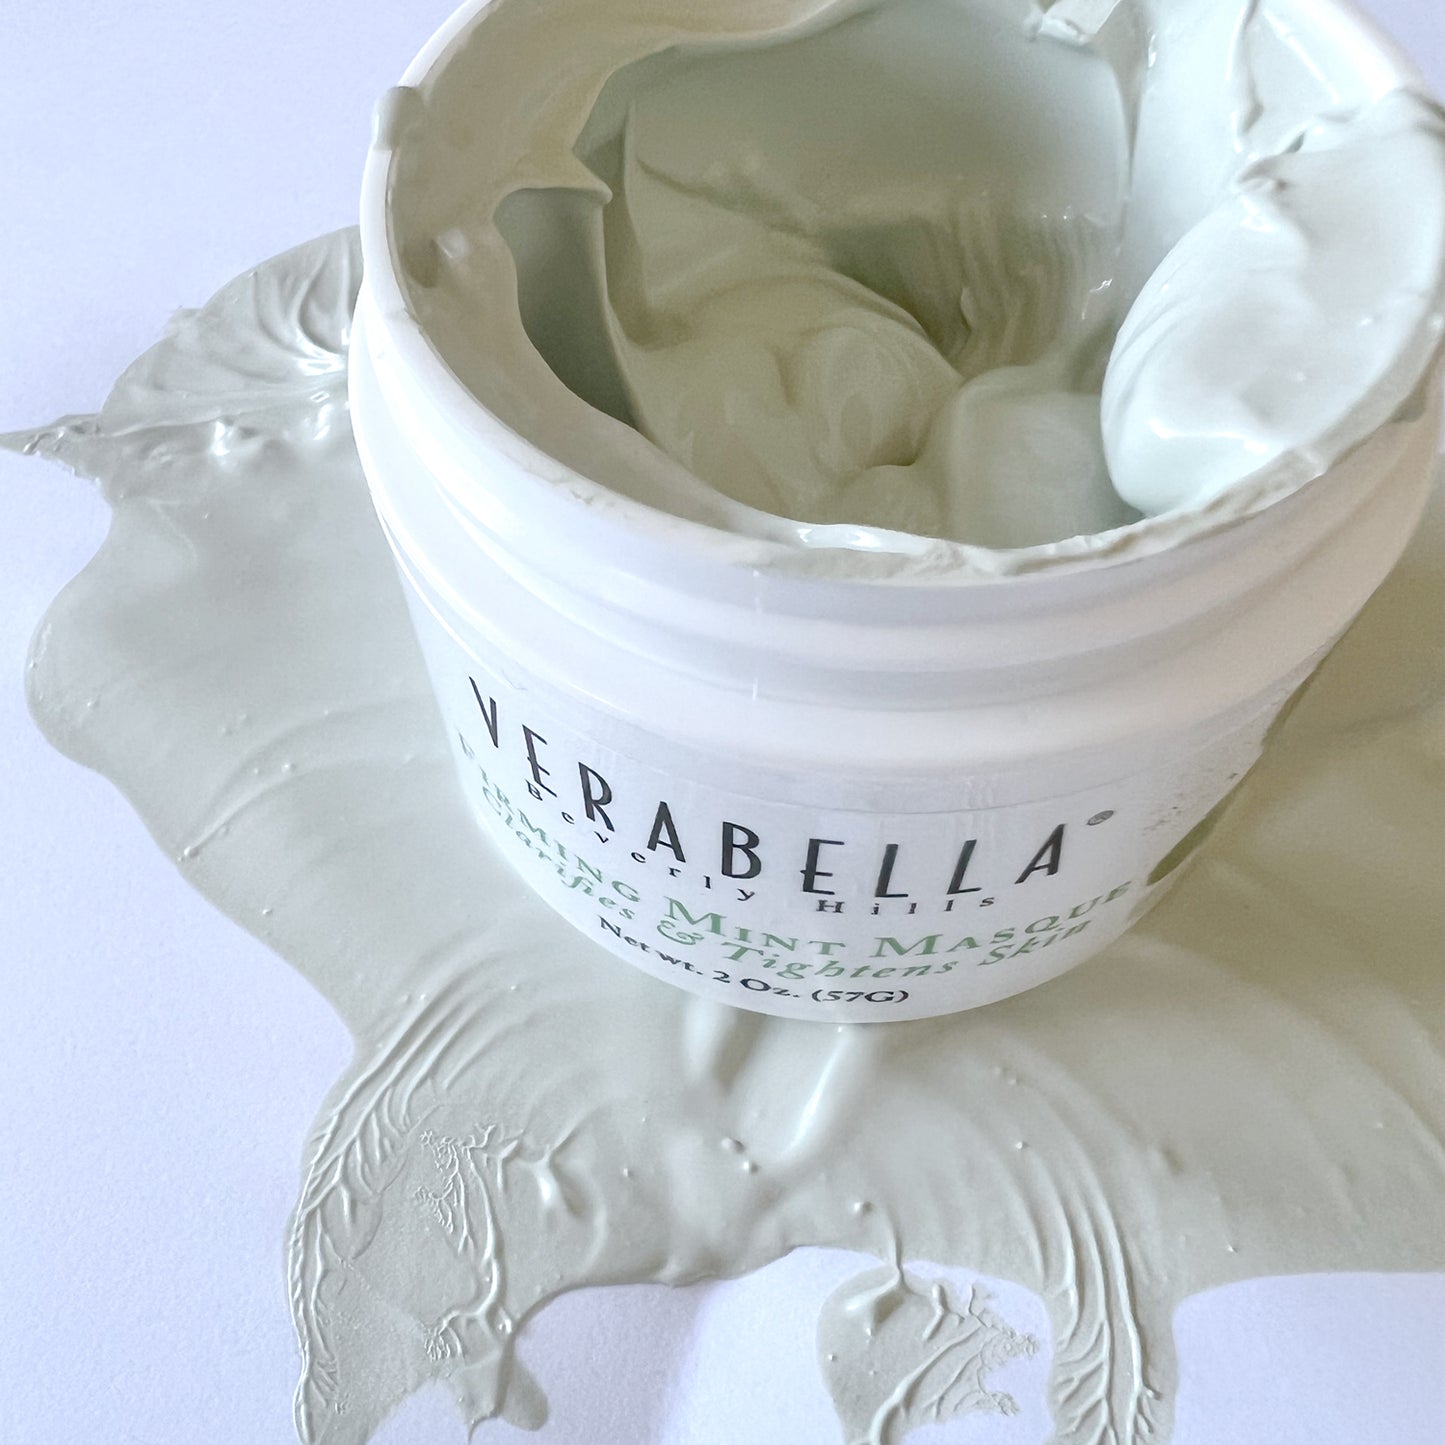 Inside Container -  - Verabella Firming Mint Masque Mask